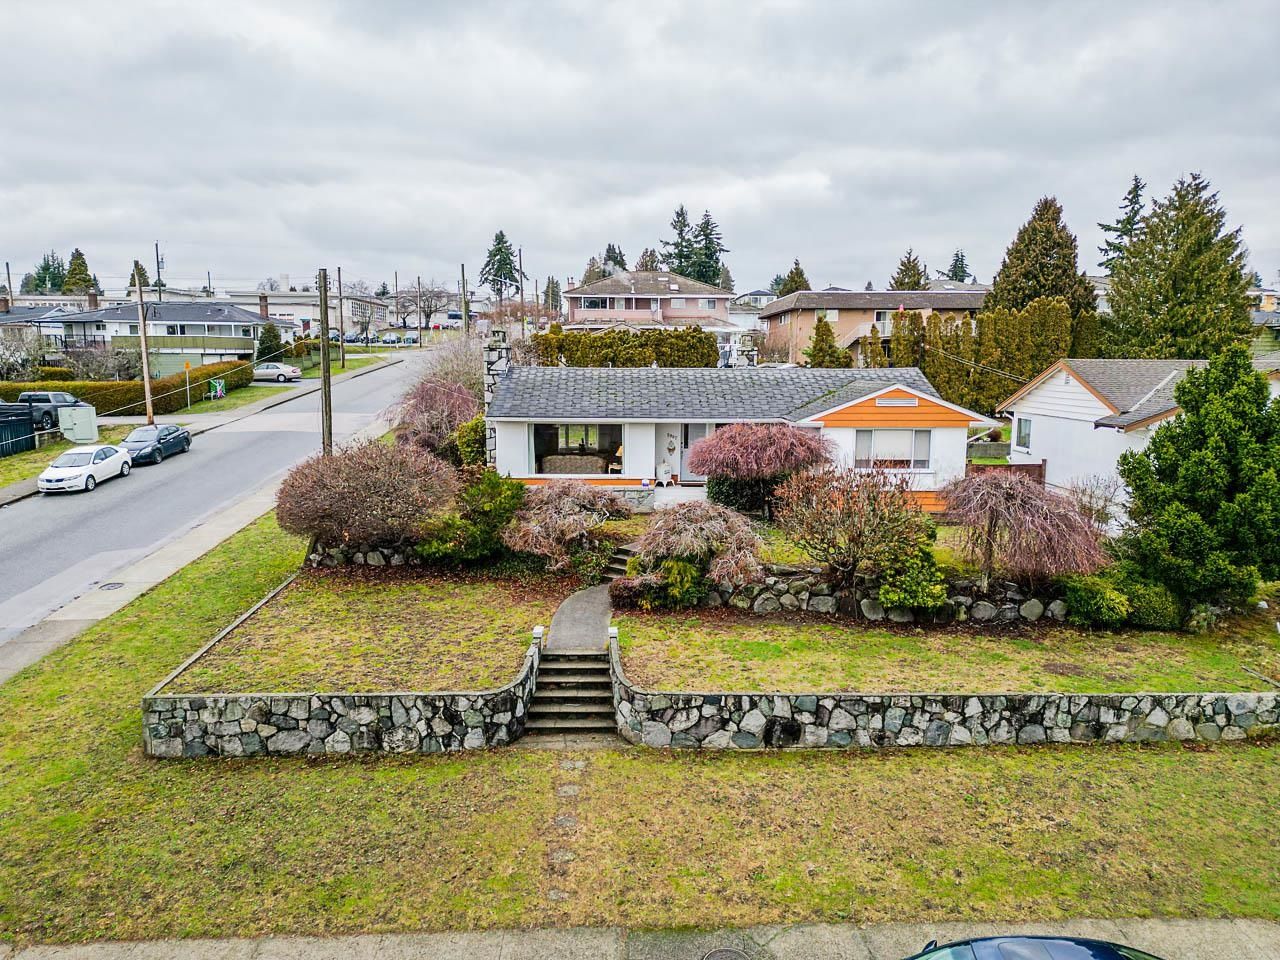 We have sold a property at 5907 MCKEE ST in Burnaby